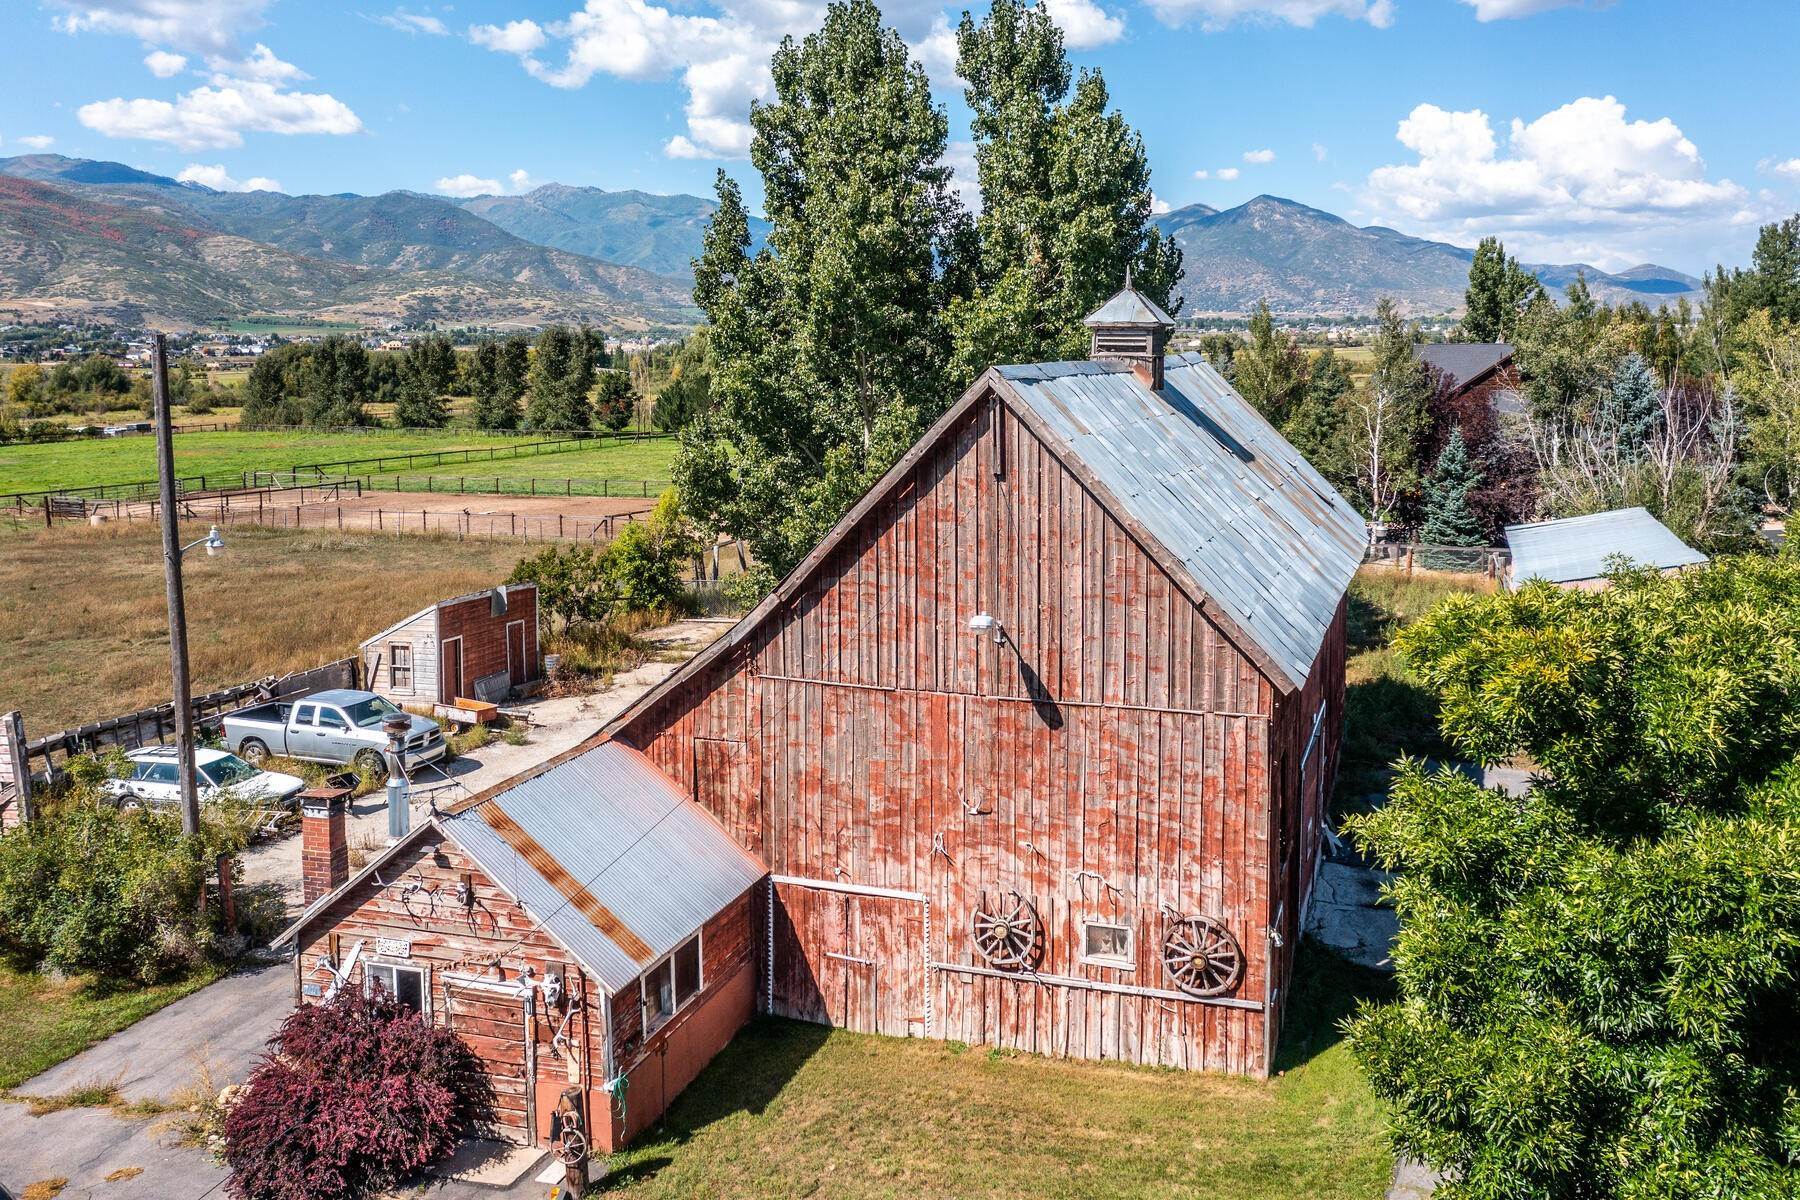 14. Farm and Ranch Properties for Sale at 3 Acres, Winterton barn, Subdividable, Limitless Potential! 3040 West 2400 South Heber City, Utah 84032 United States